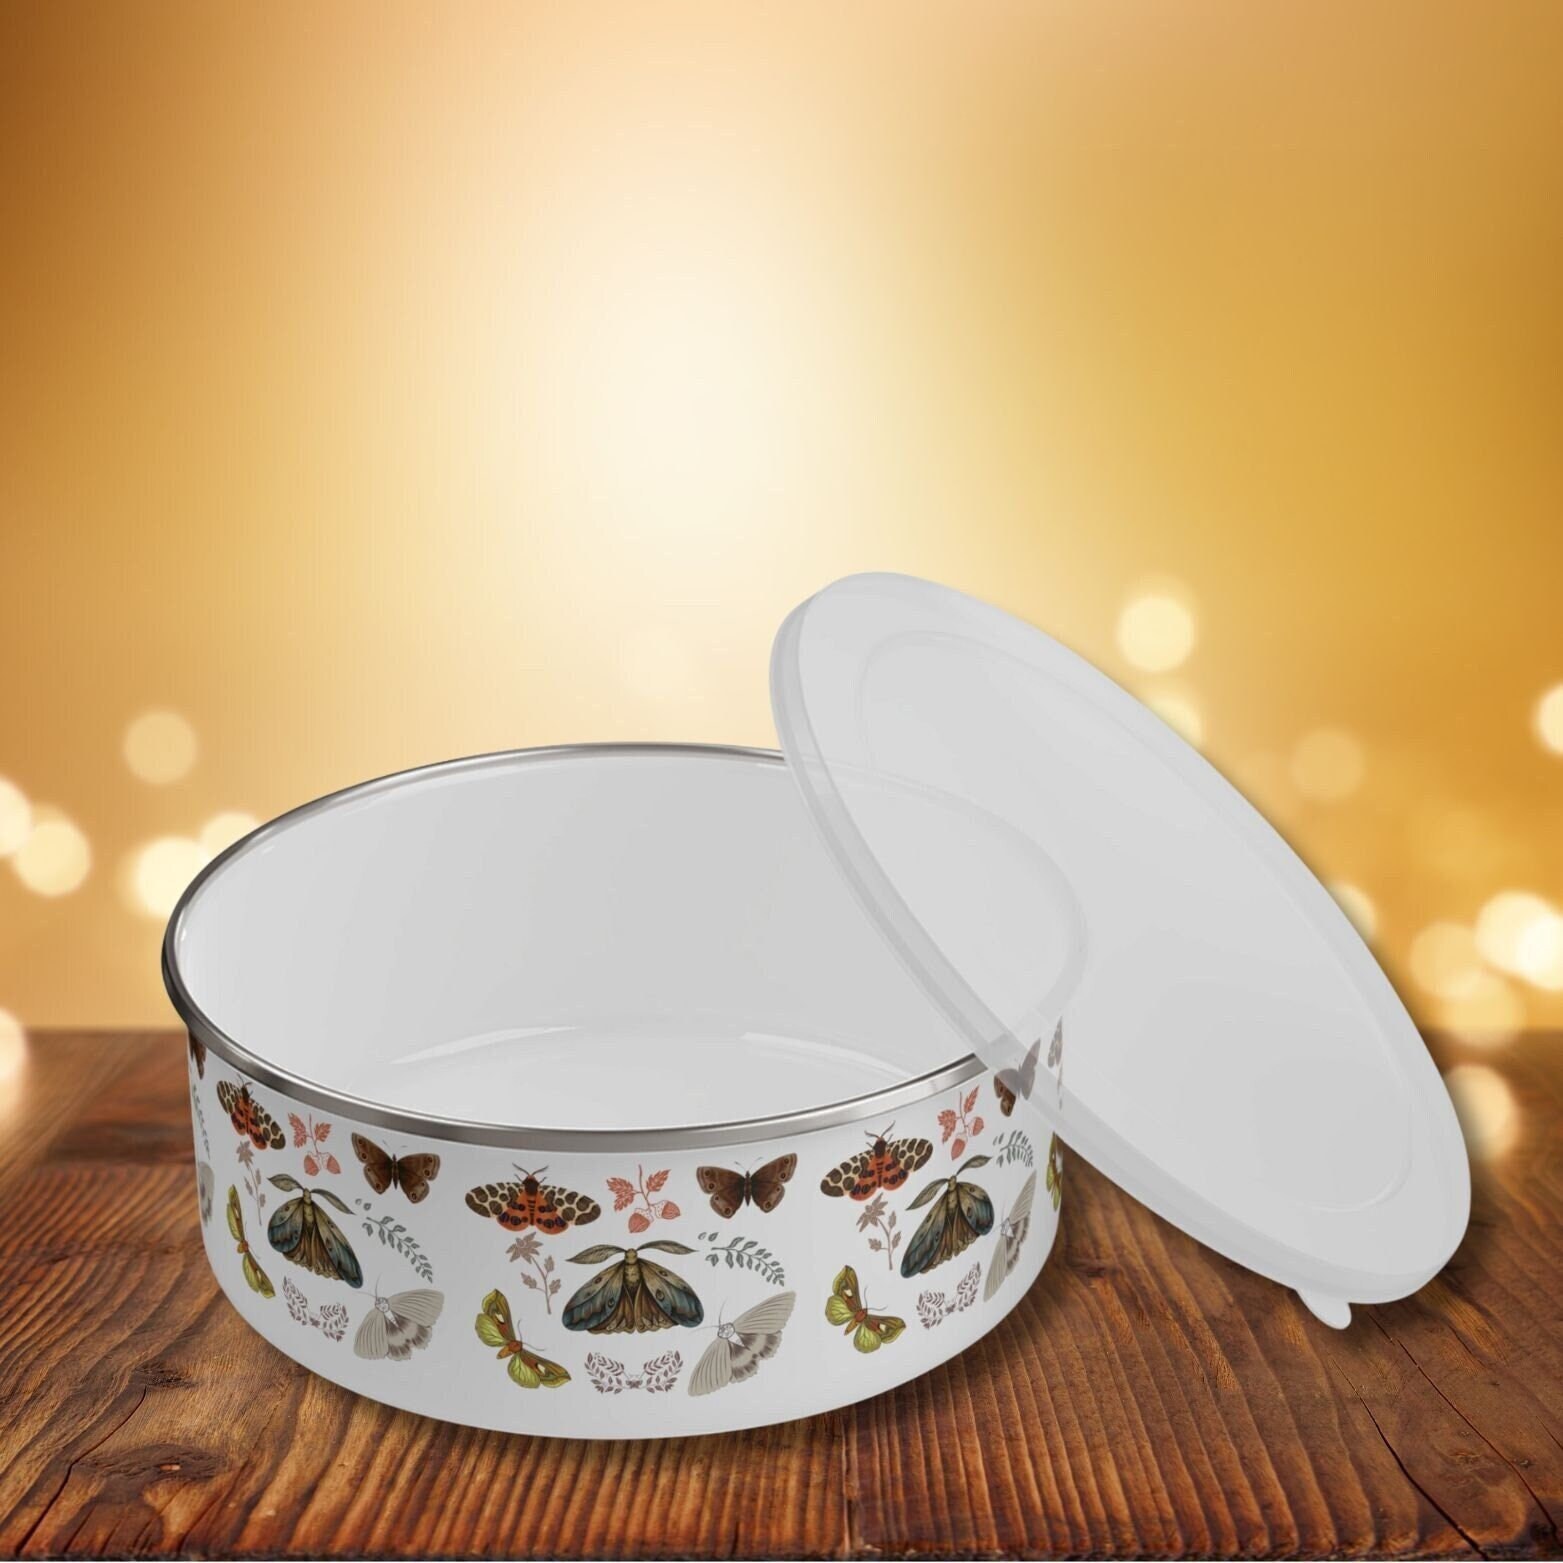 Buy Enamel Bowl With Lid Online In India Etsy India